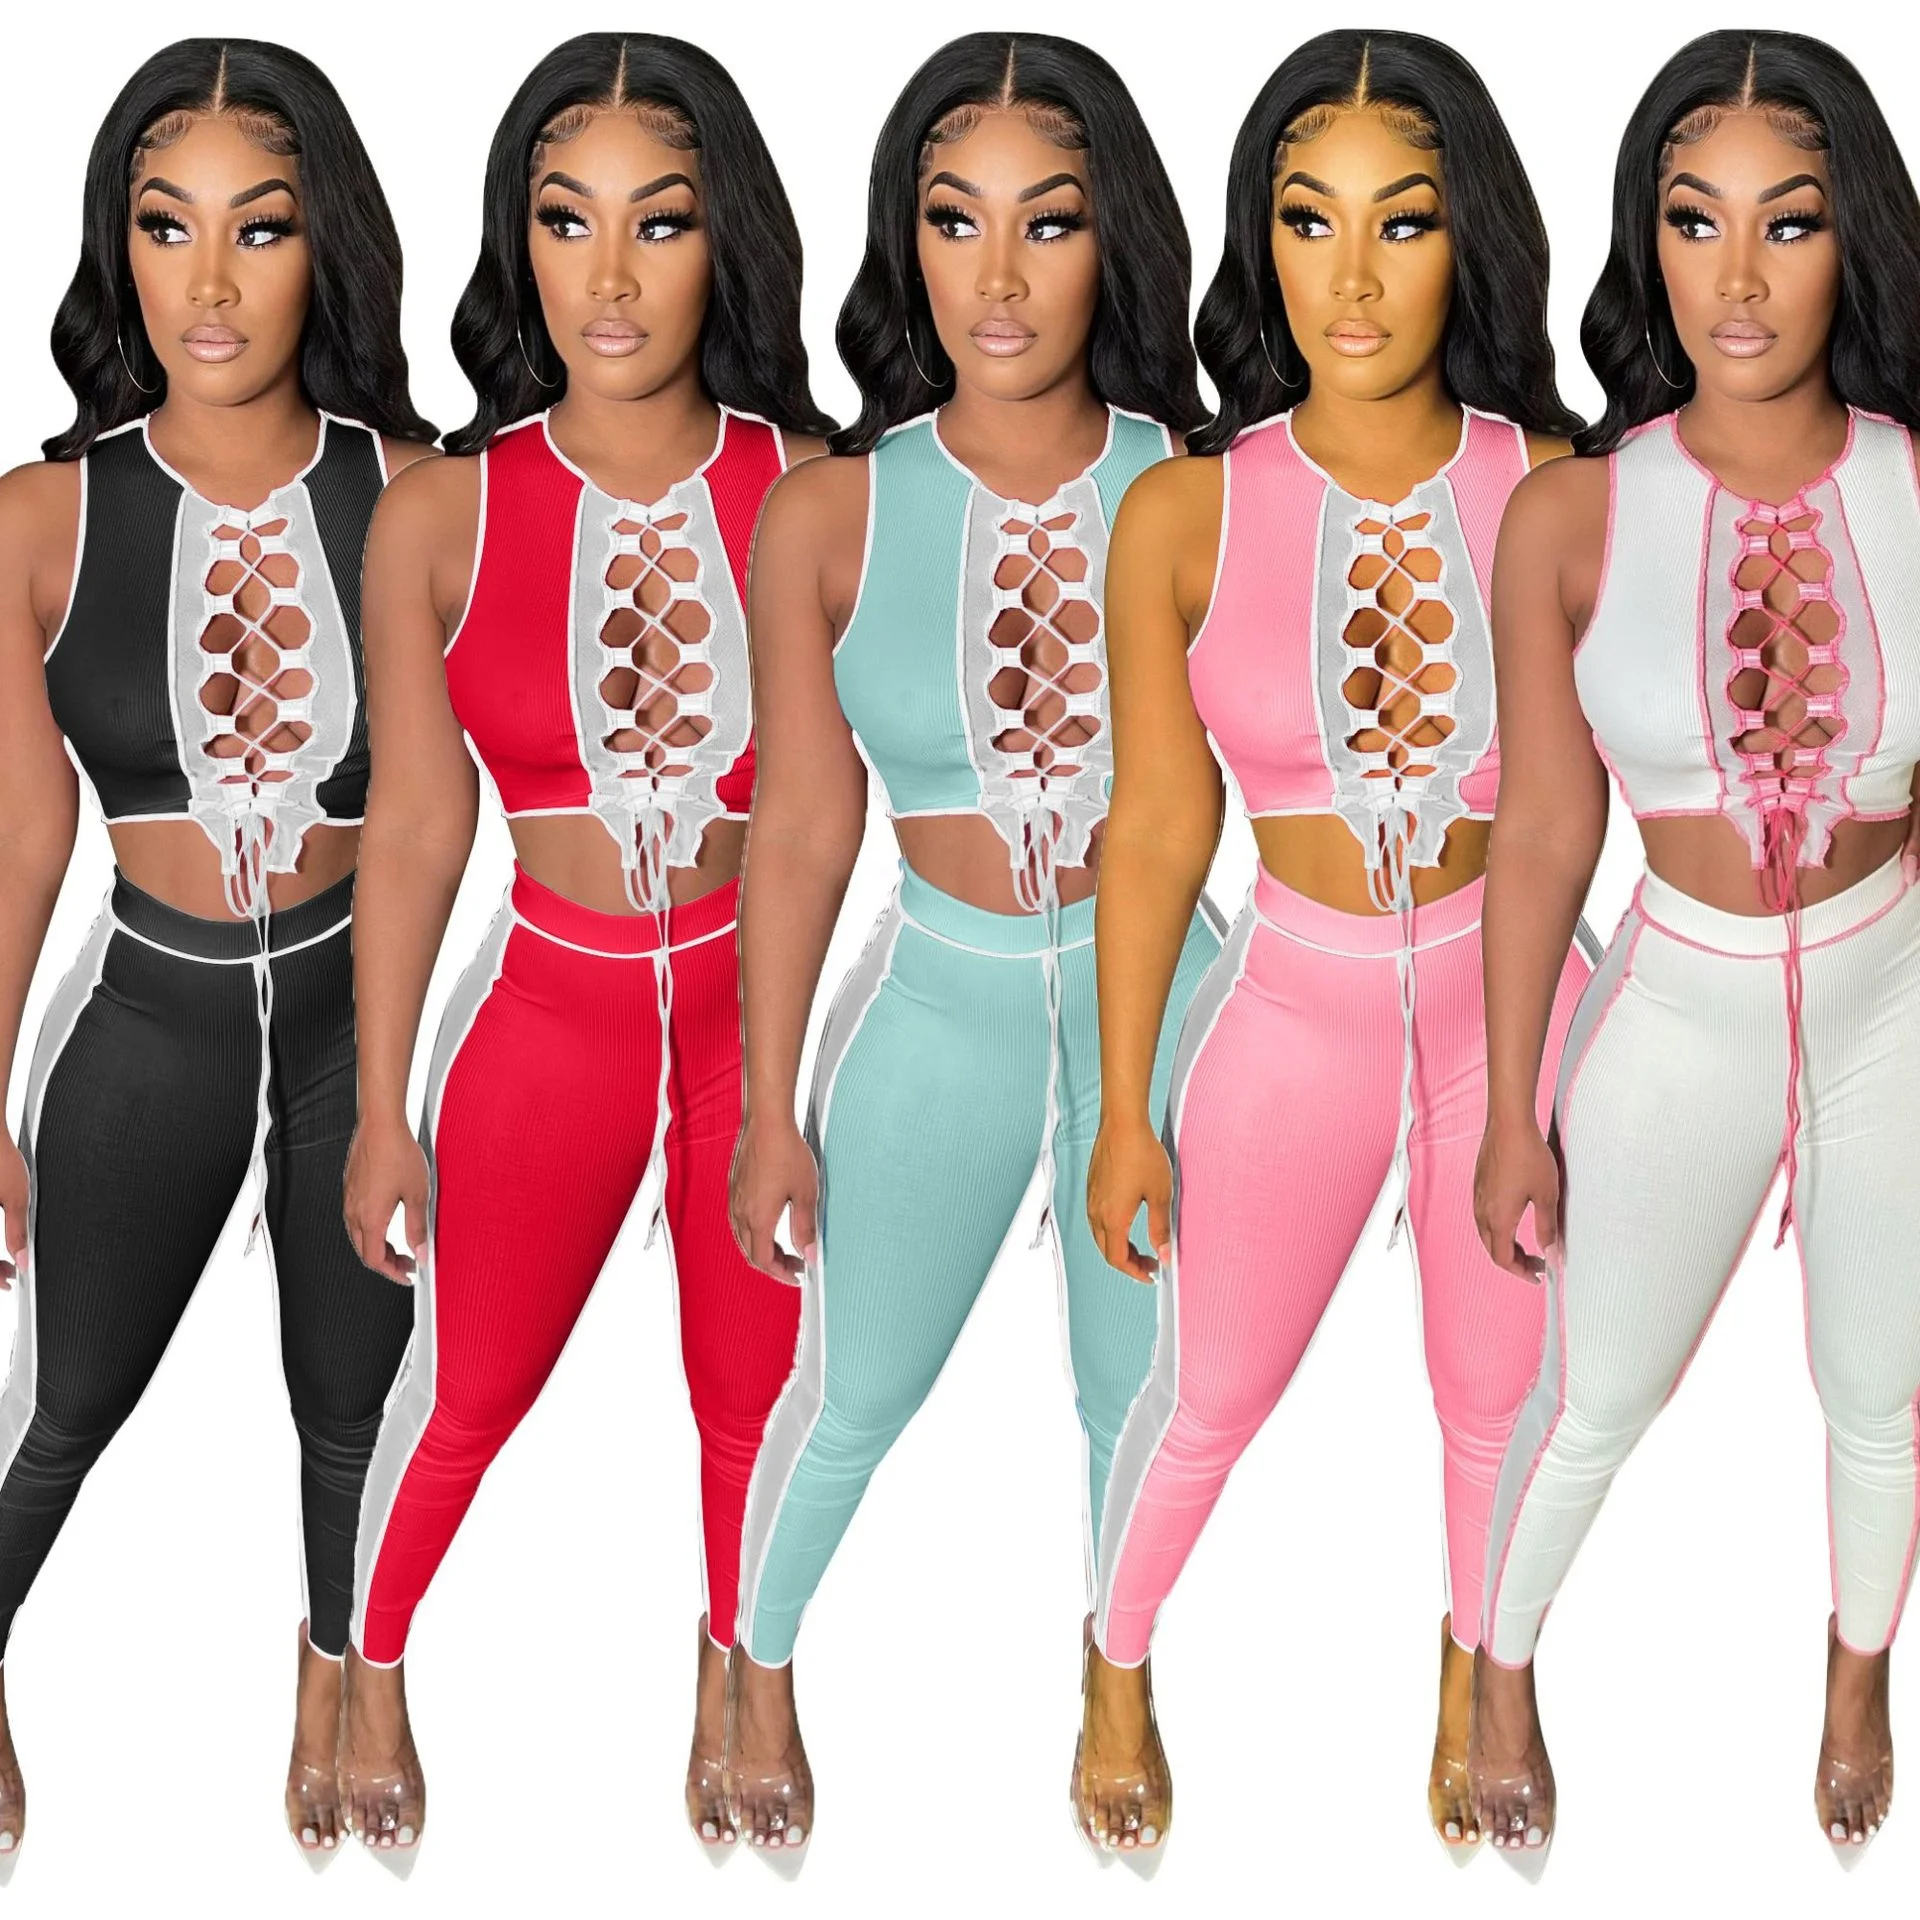 

2021 Summer Women Nightclub Party Wear Sheer Mesh Matching Outfit Patchwork Crop Top Slim Fit Tracksuit Pants Set